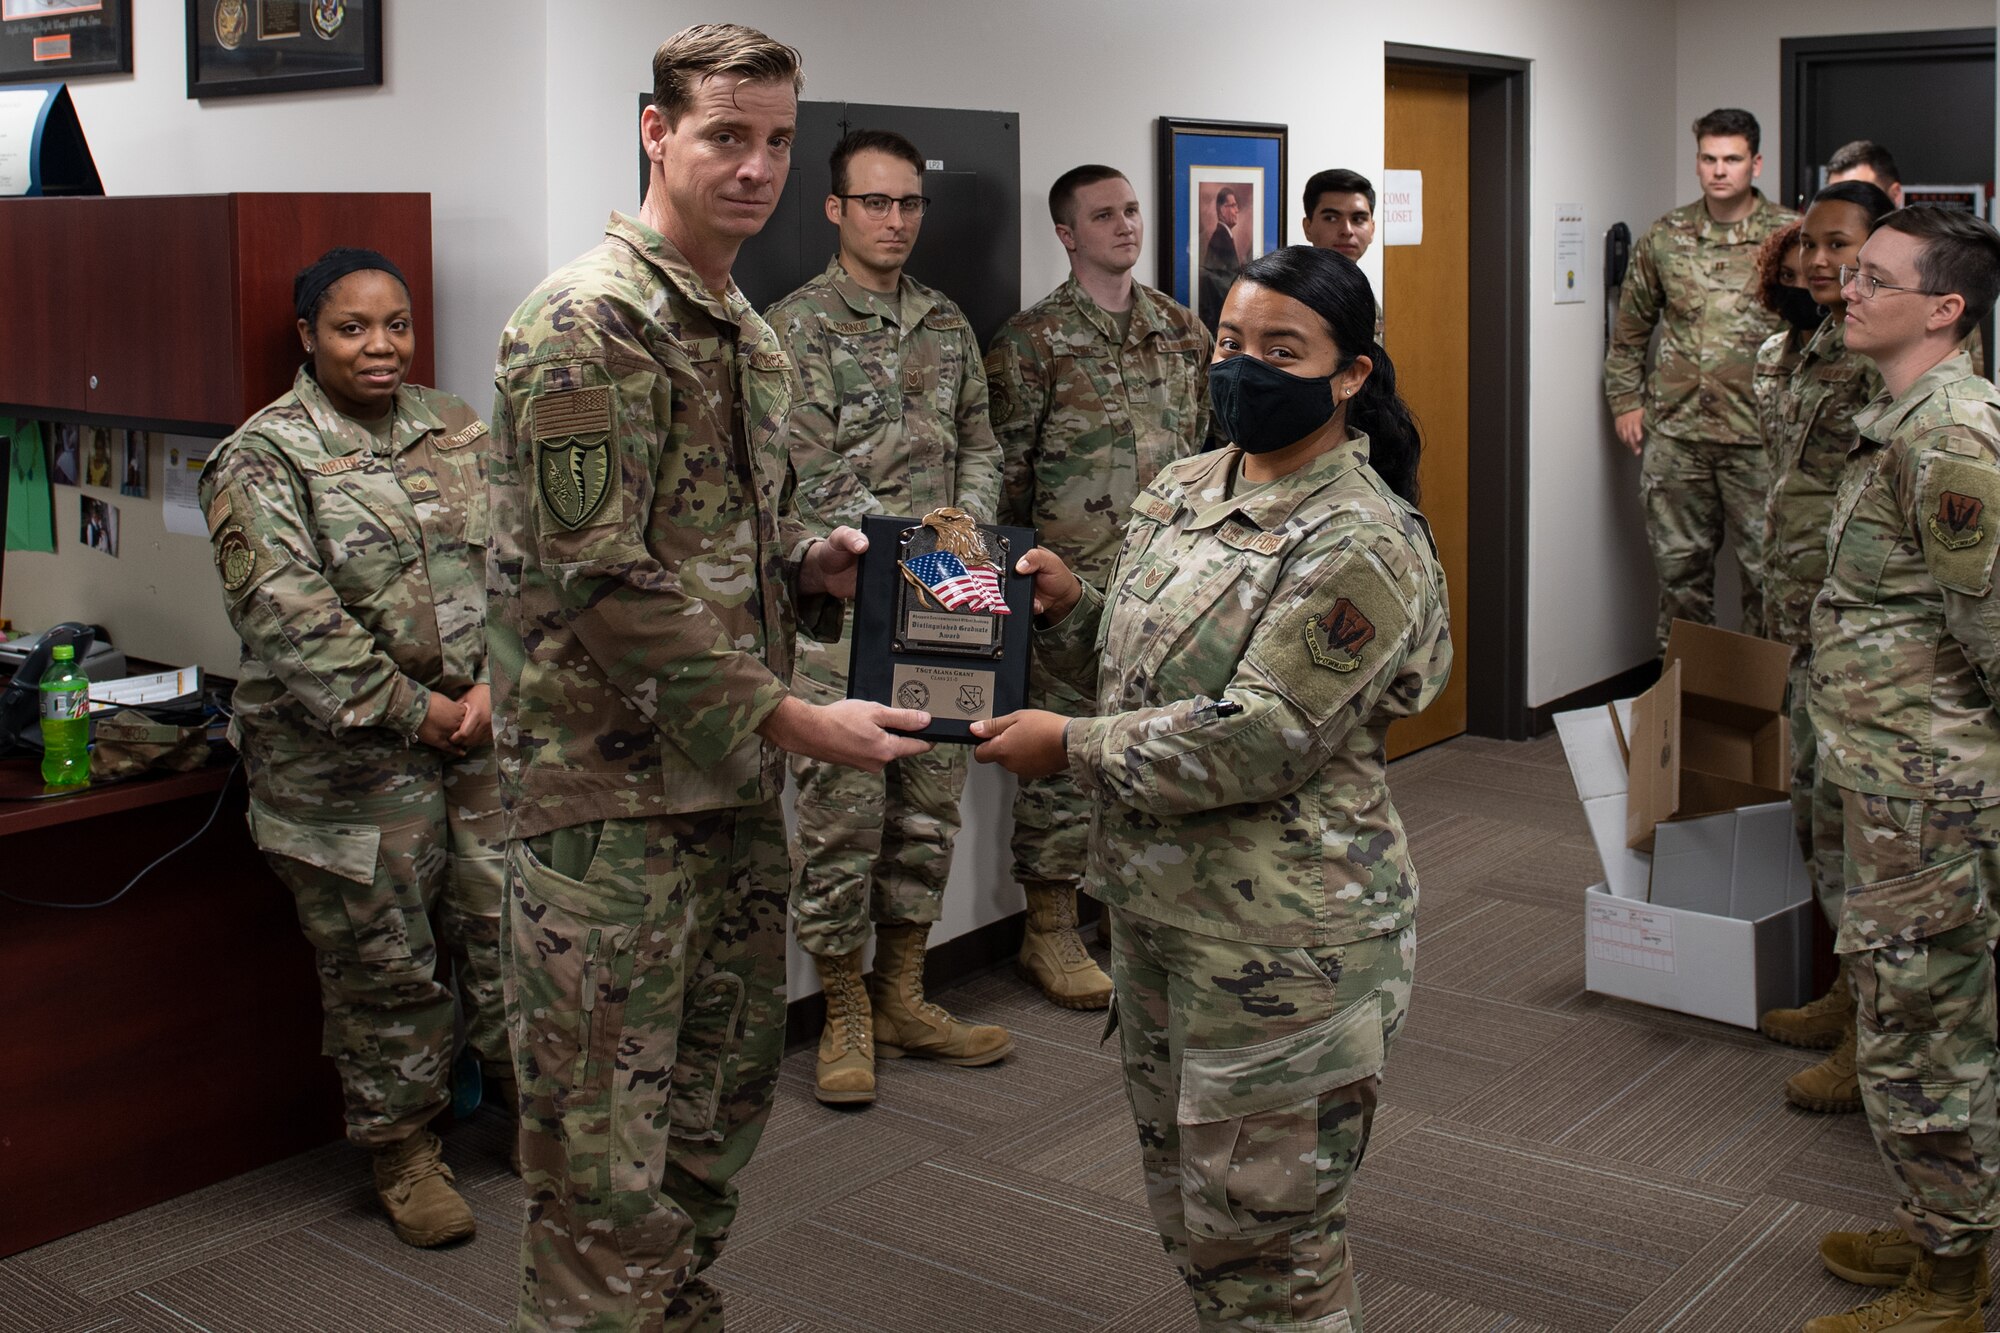 Two service members holding an award